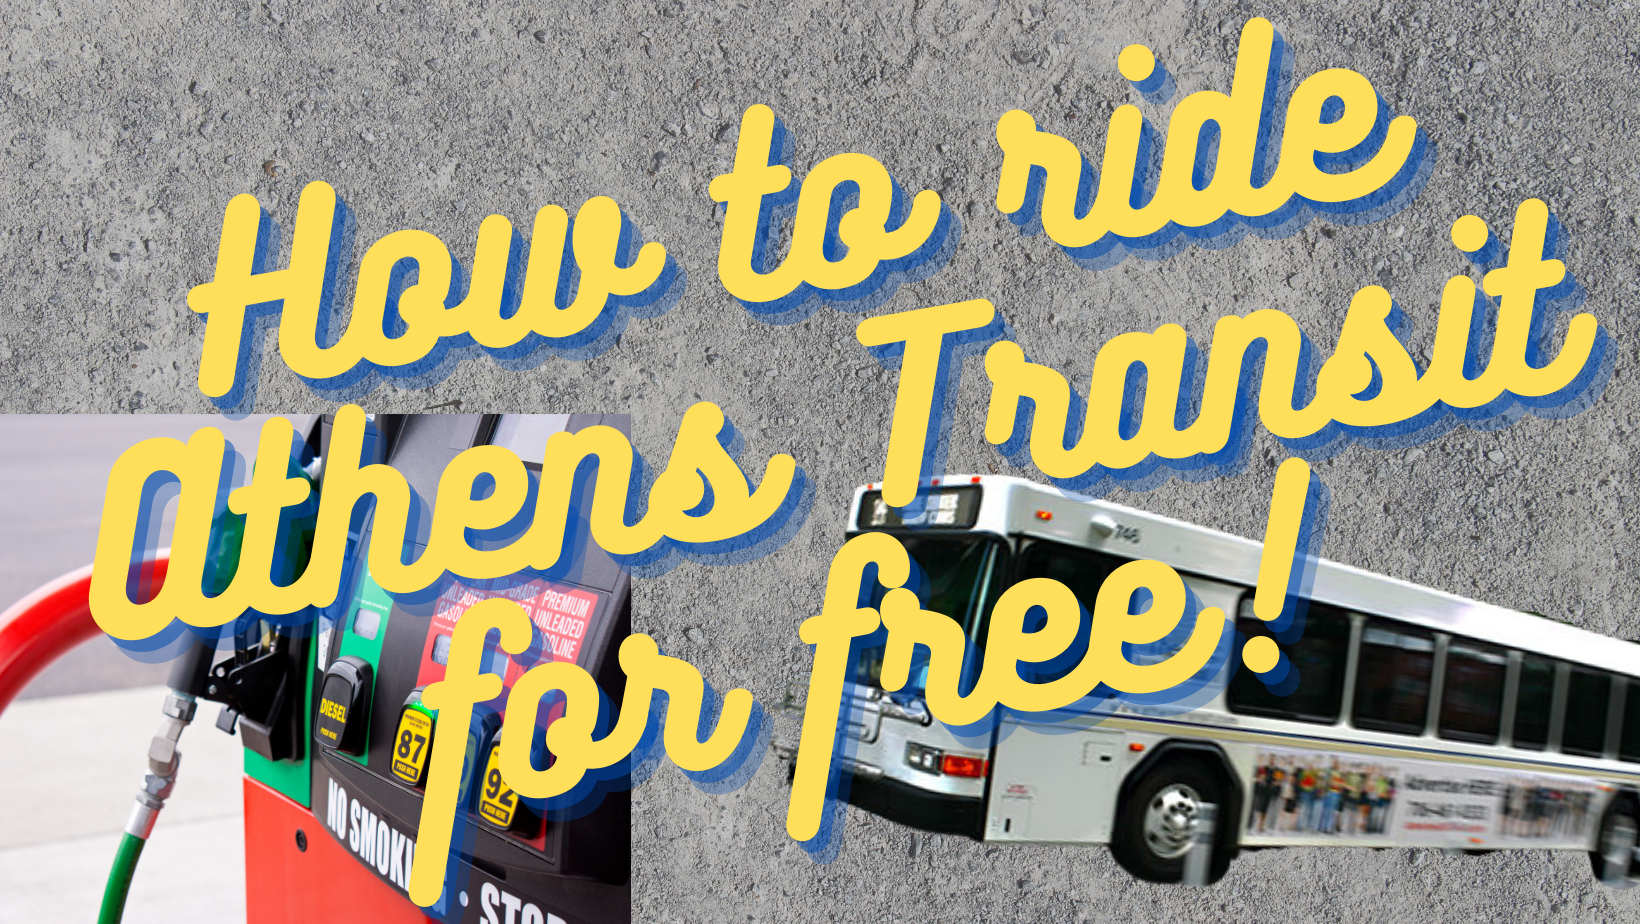 How to ride Athens Transit for free instead of paying $4/gallon